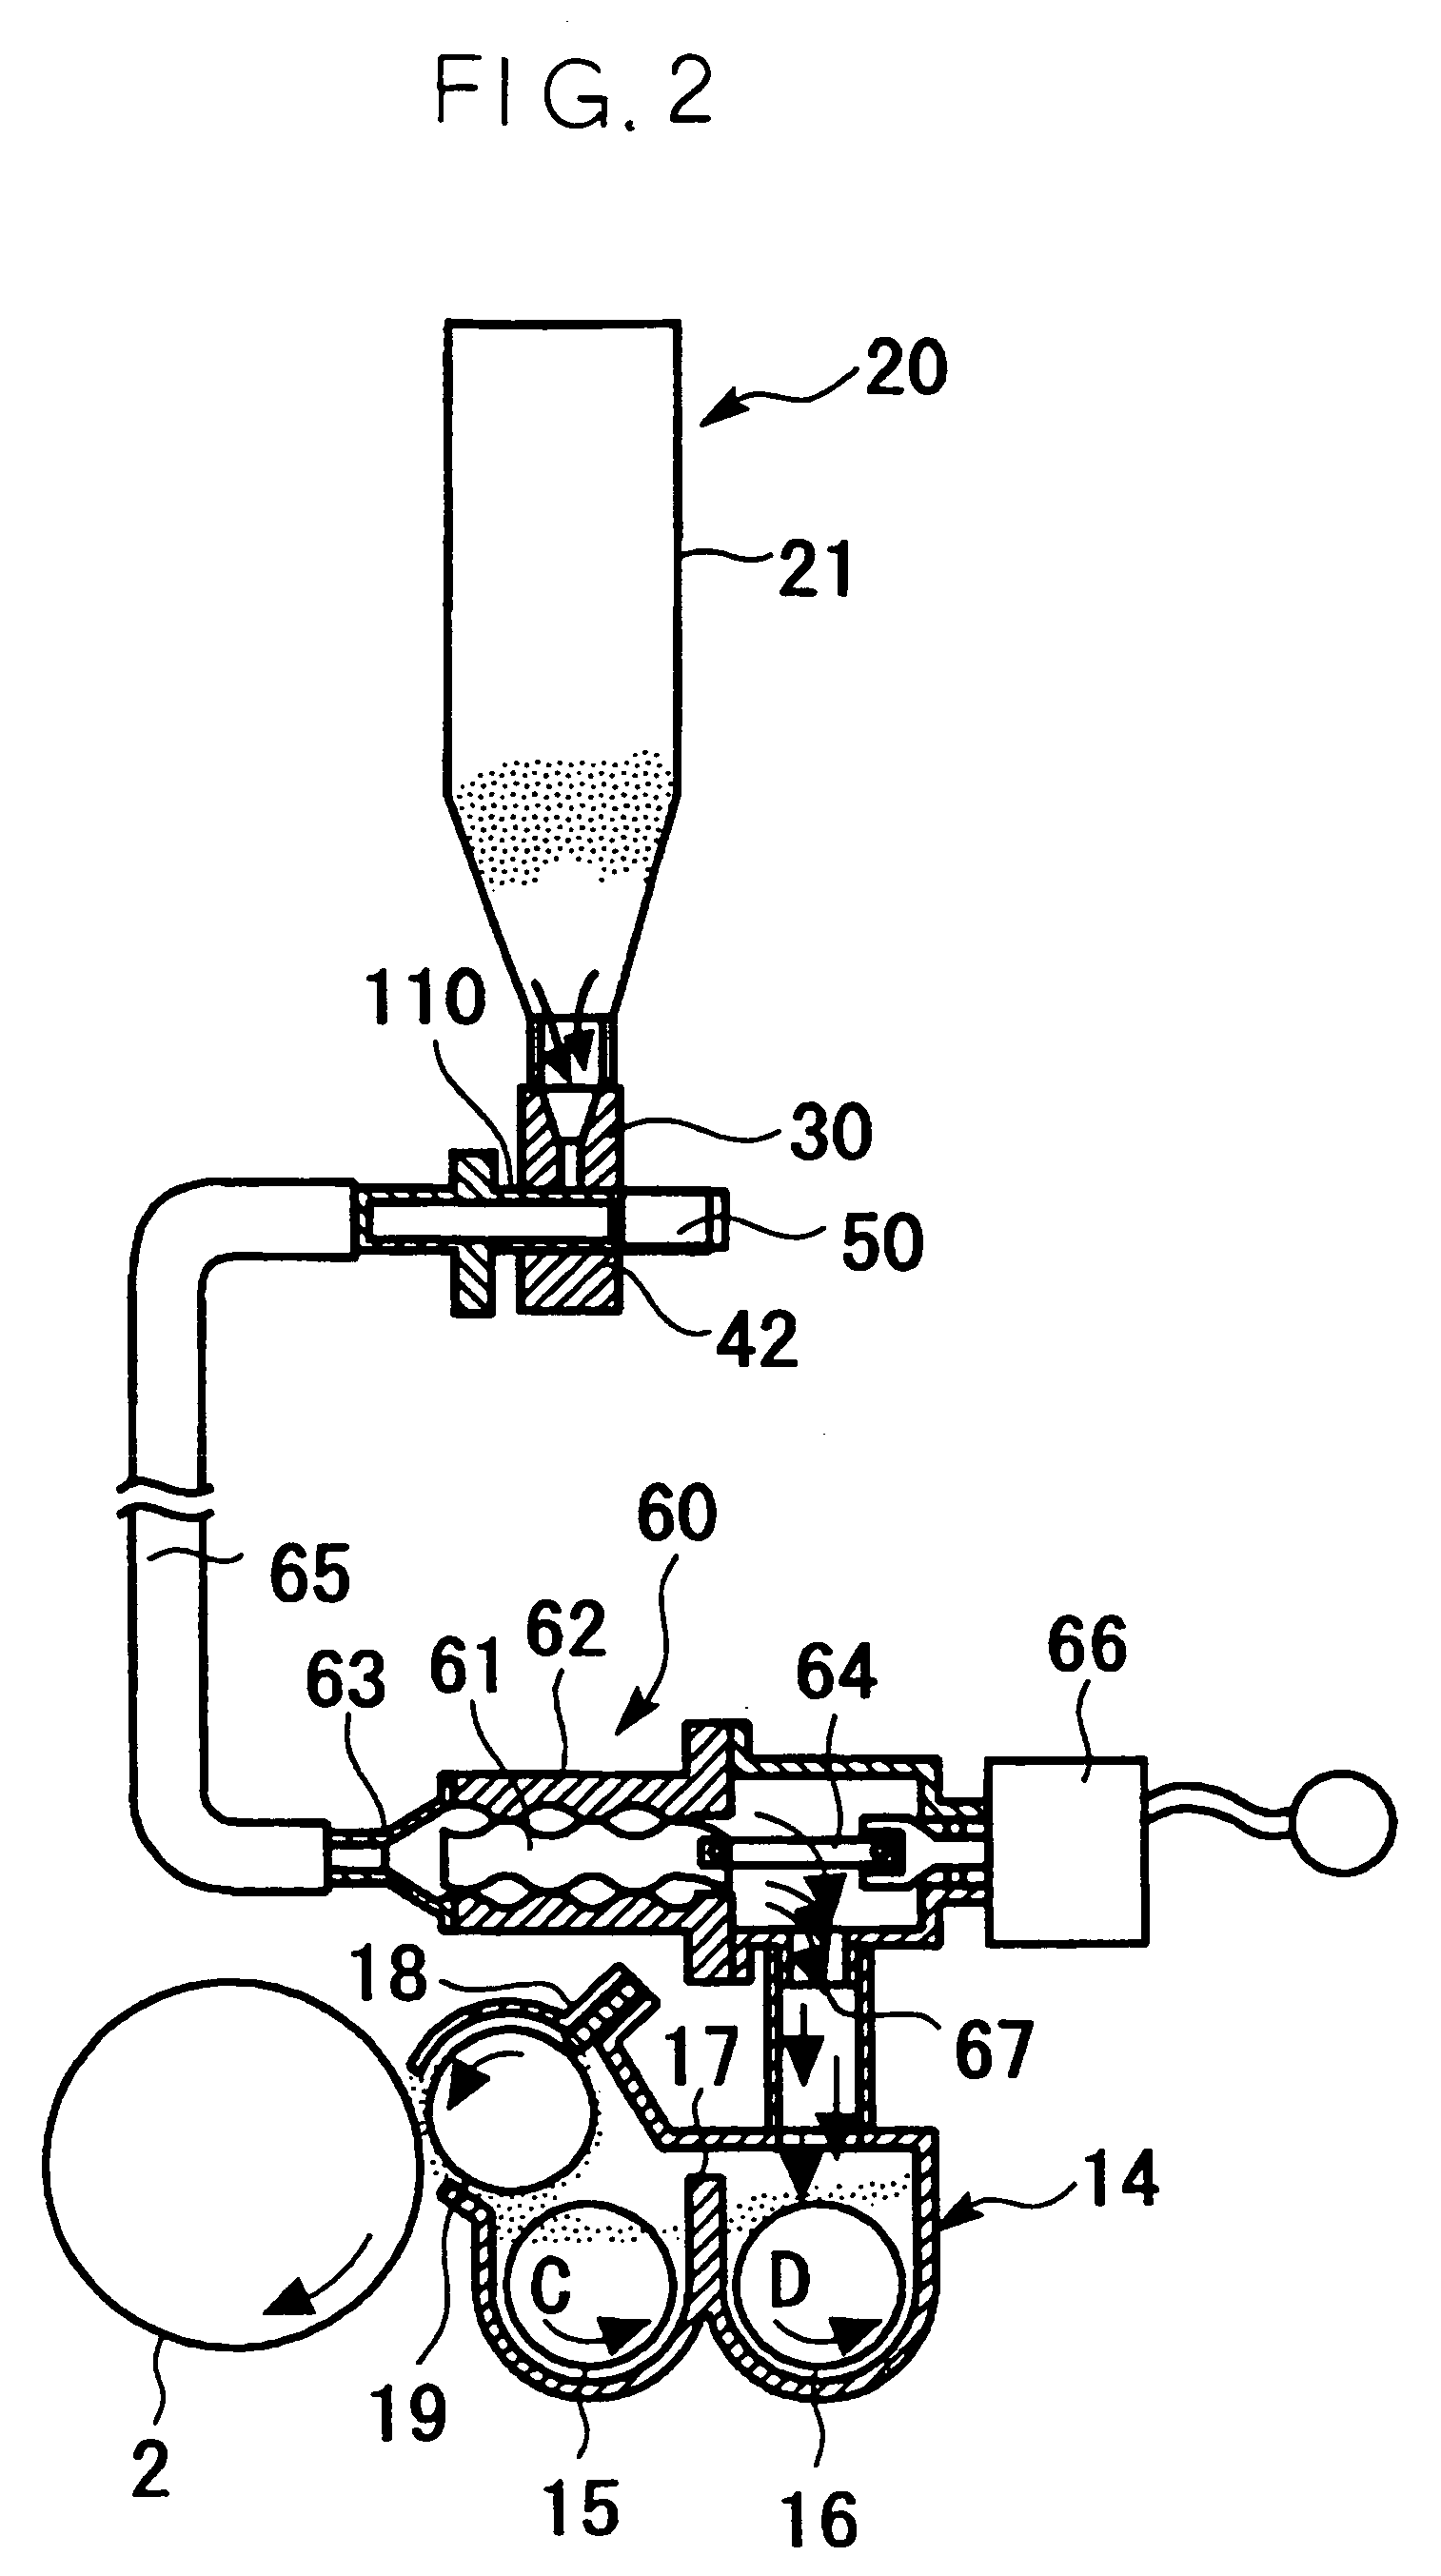 Toner replenishing device with timing control of toner replenishing device